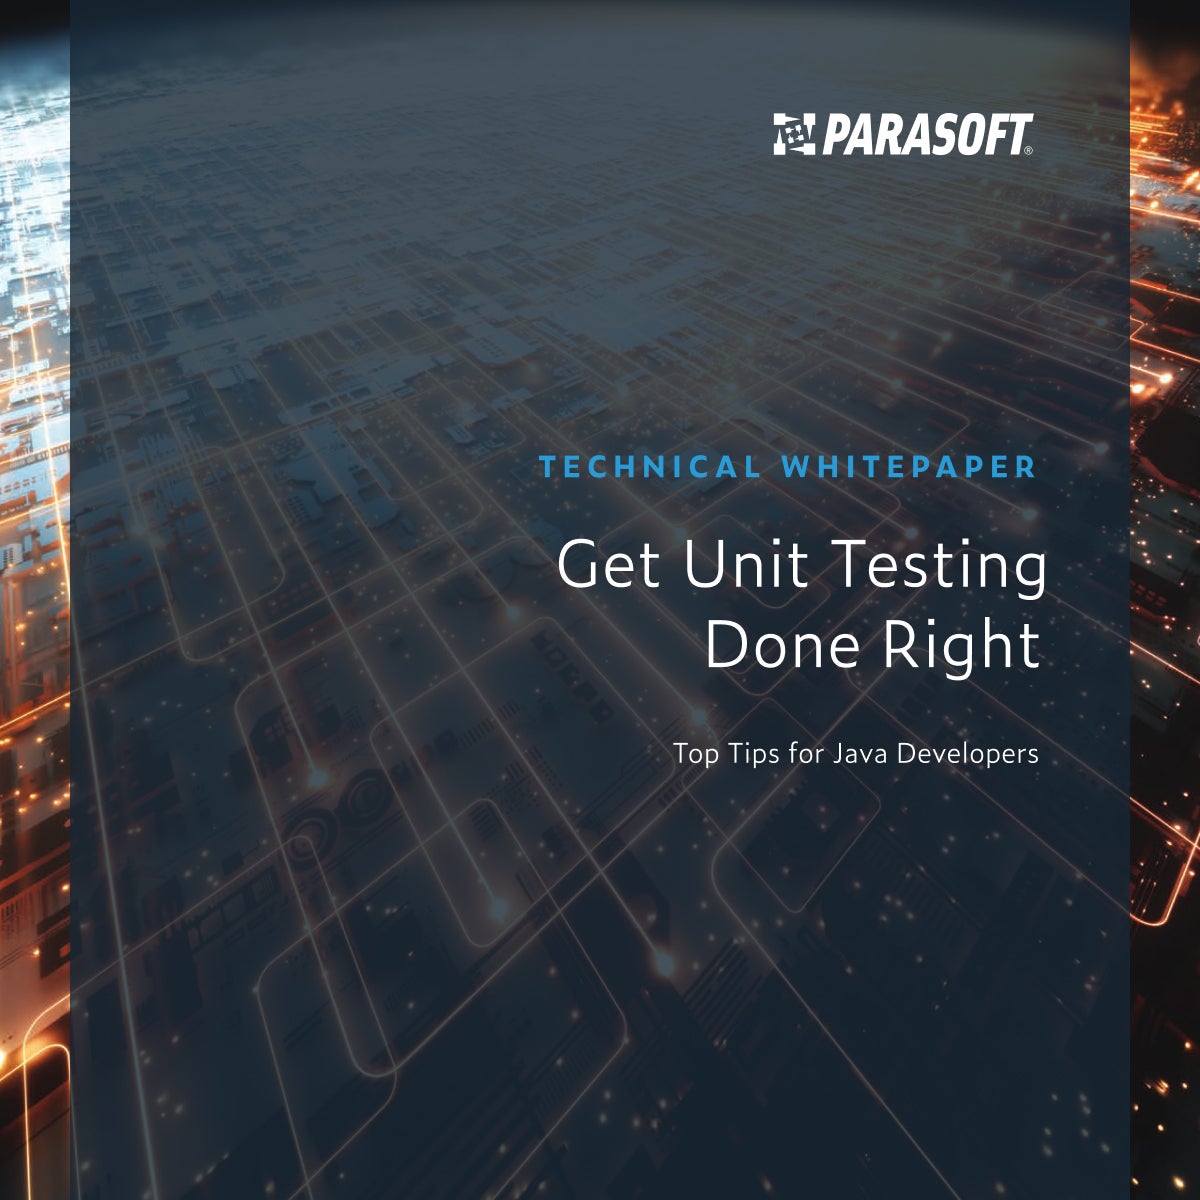 Get Unit Testing Done Right Whitepaper Cover